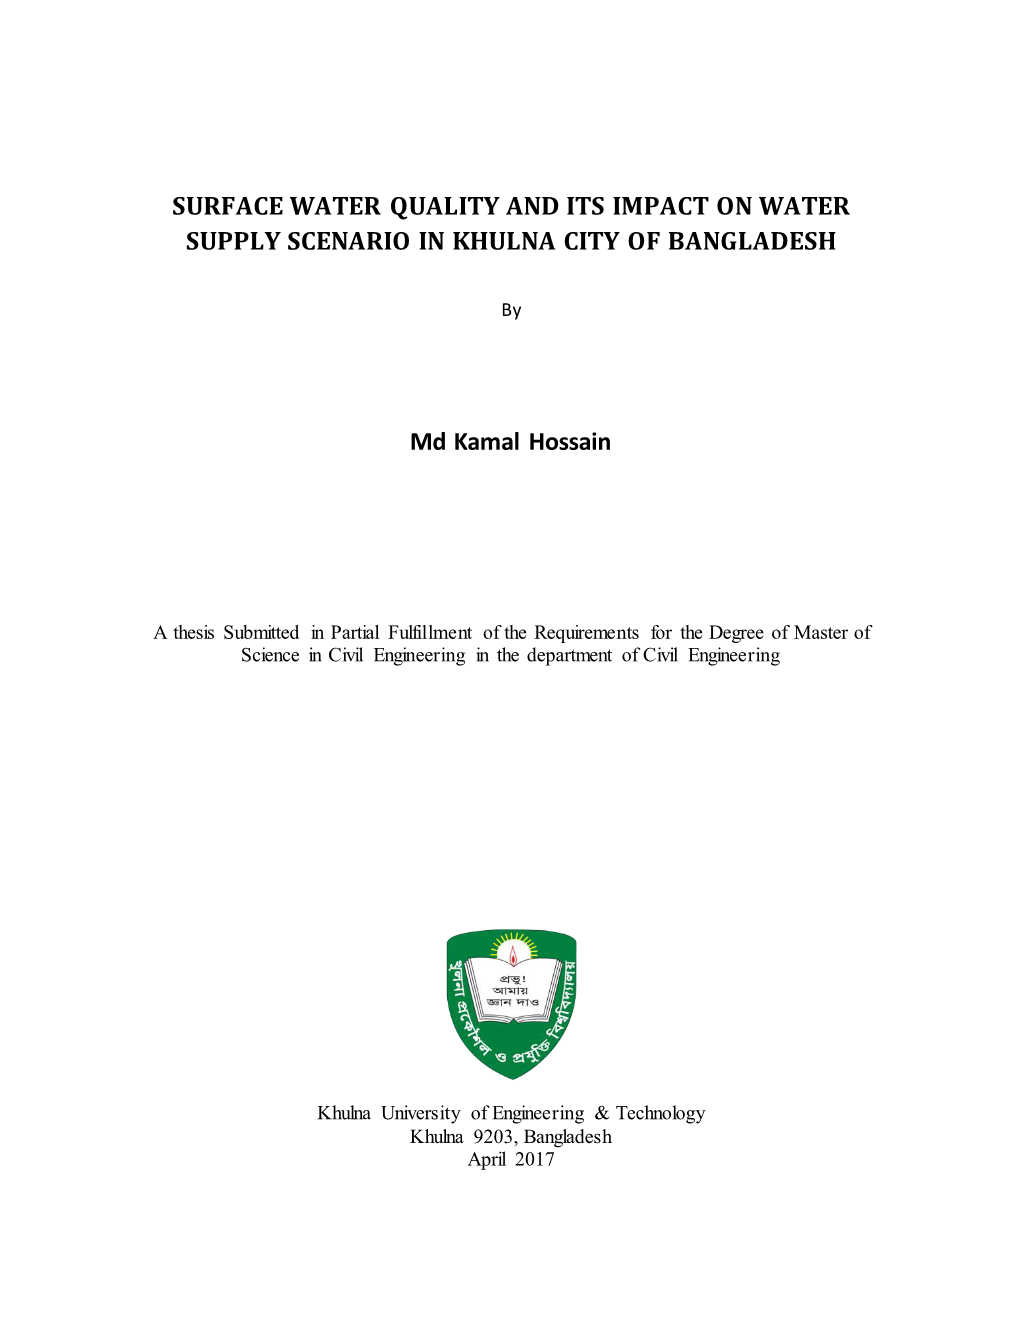 Surface Water Quality and Its Impact on Water Supply Scenario in Khulna City of Bangladesh